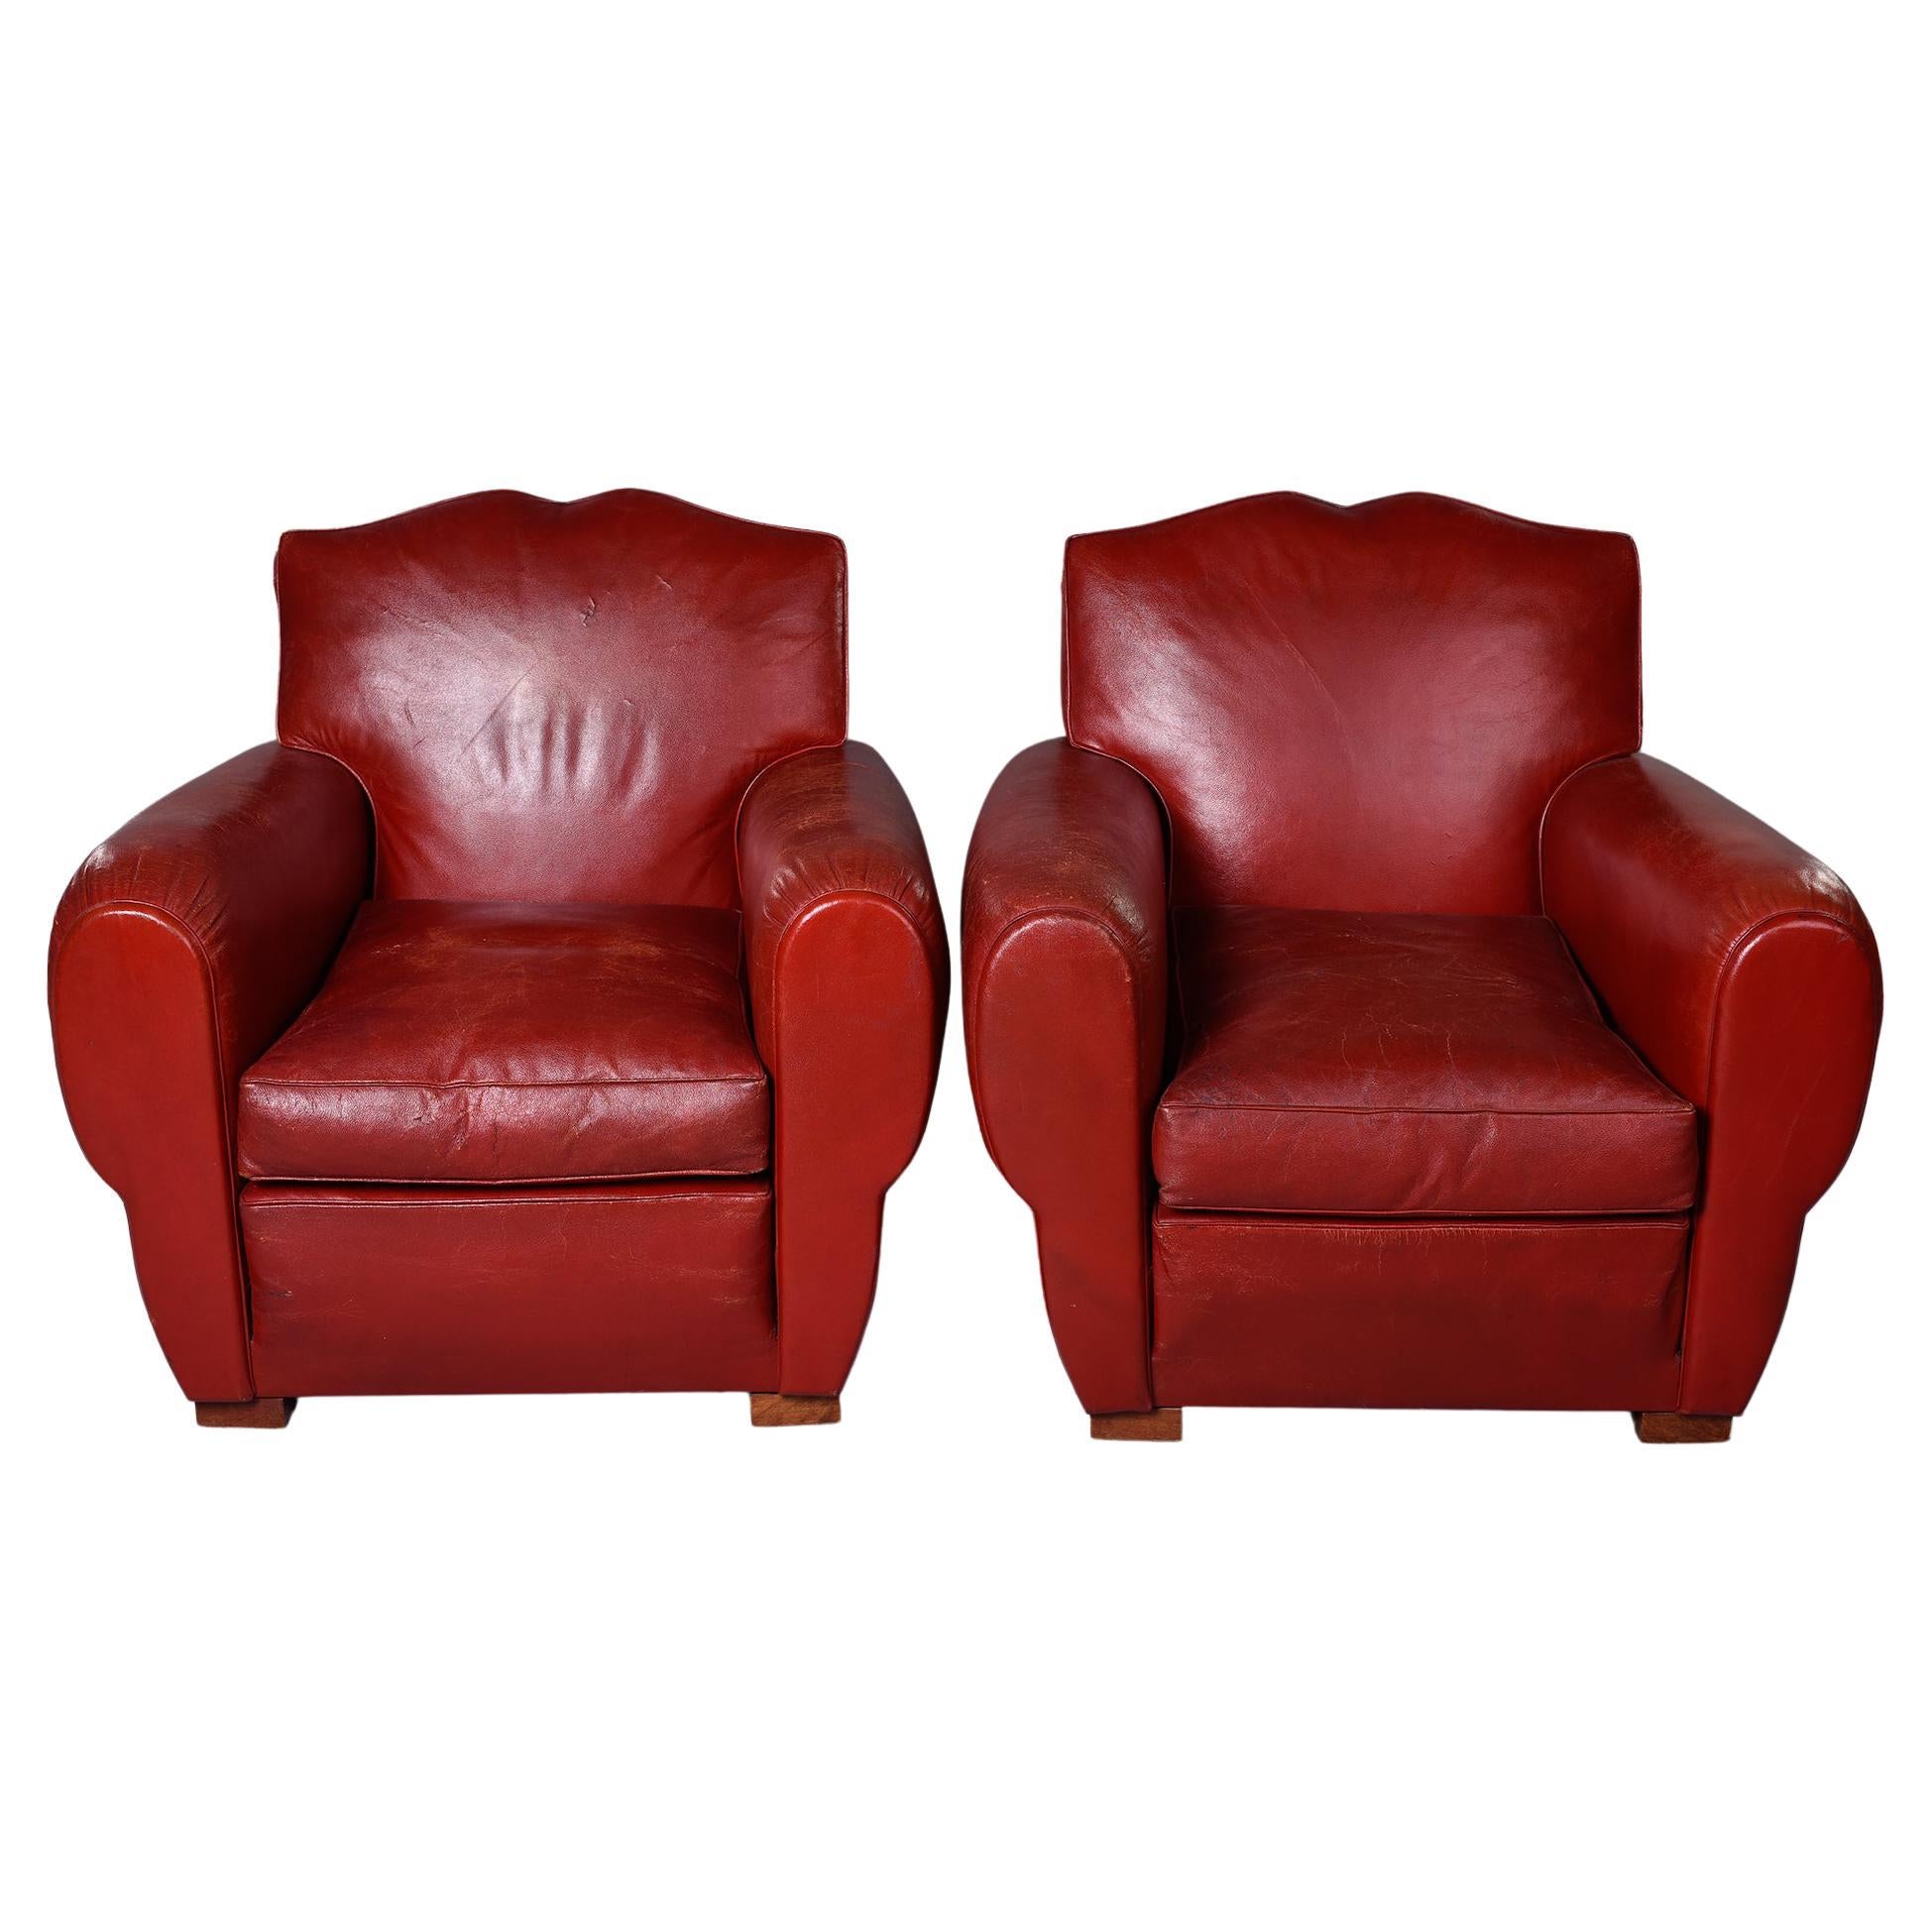 Pair of Vintage Art Deco Style Red Leather Club Chairs with Mustache Back